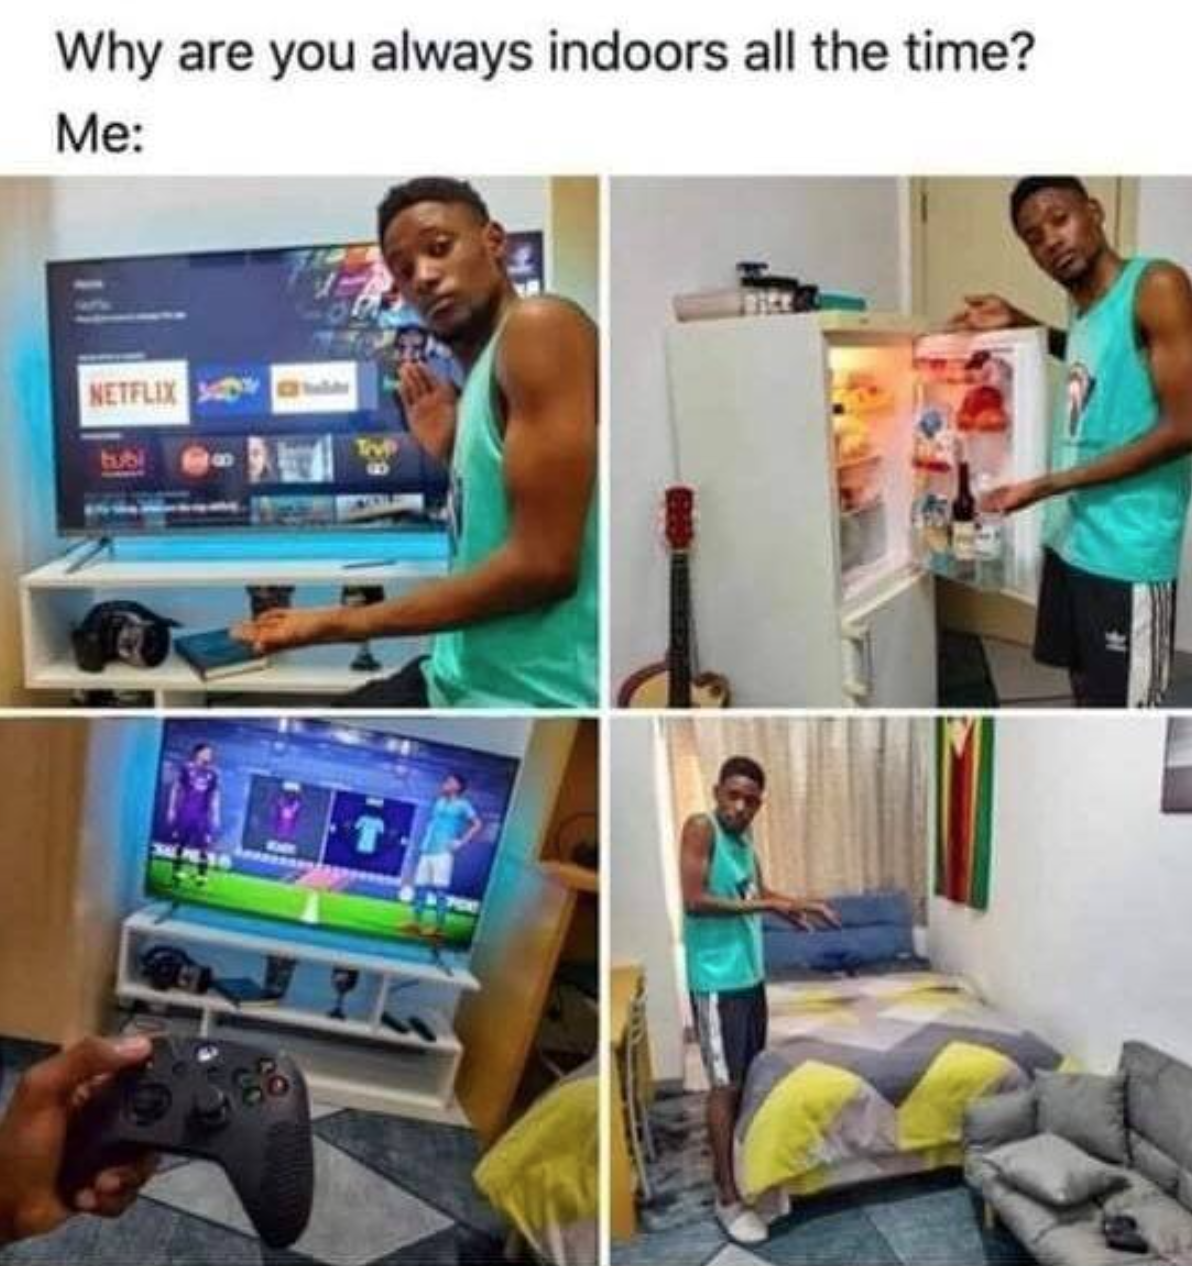 funny gaming memes - you always indoors all the time - Why are you always indoors all the time? Me Netflix Eu 66